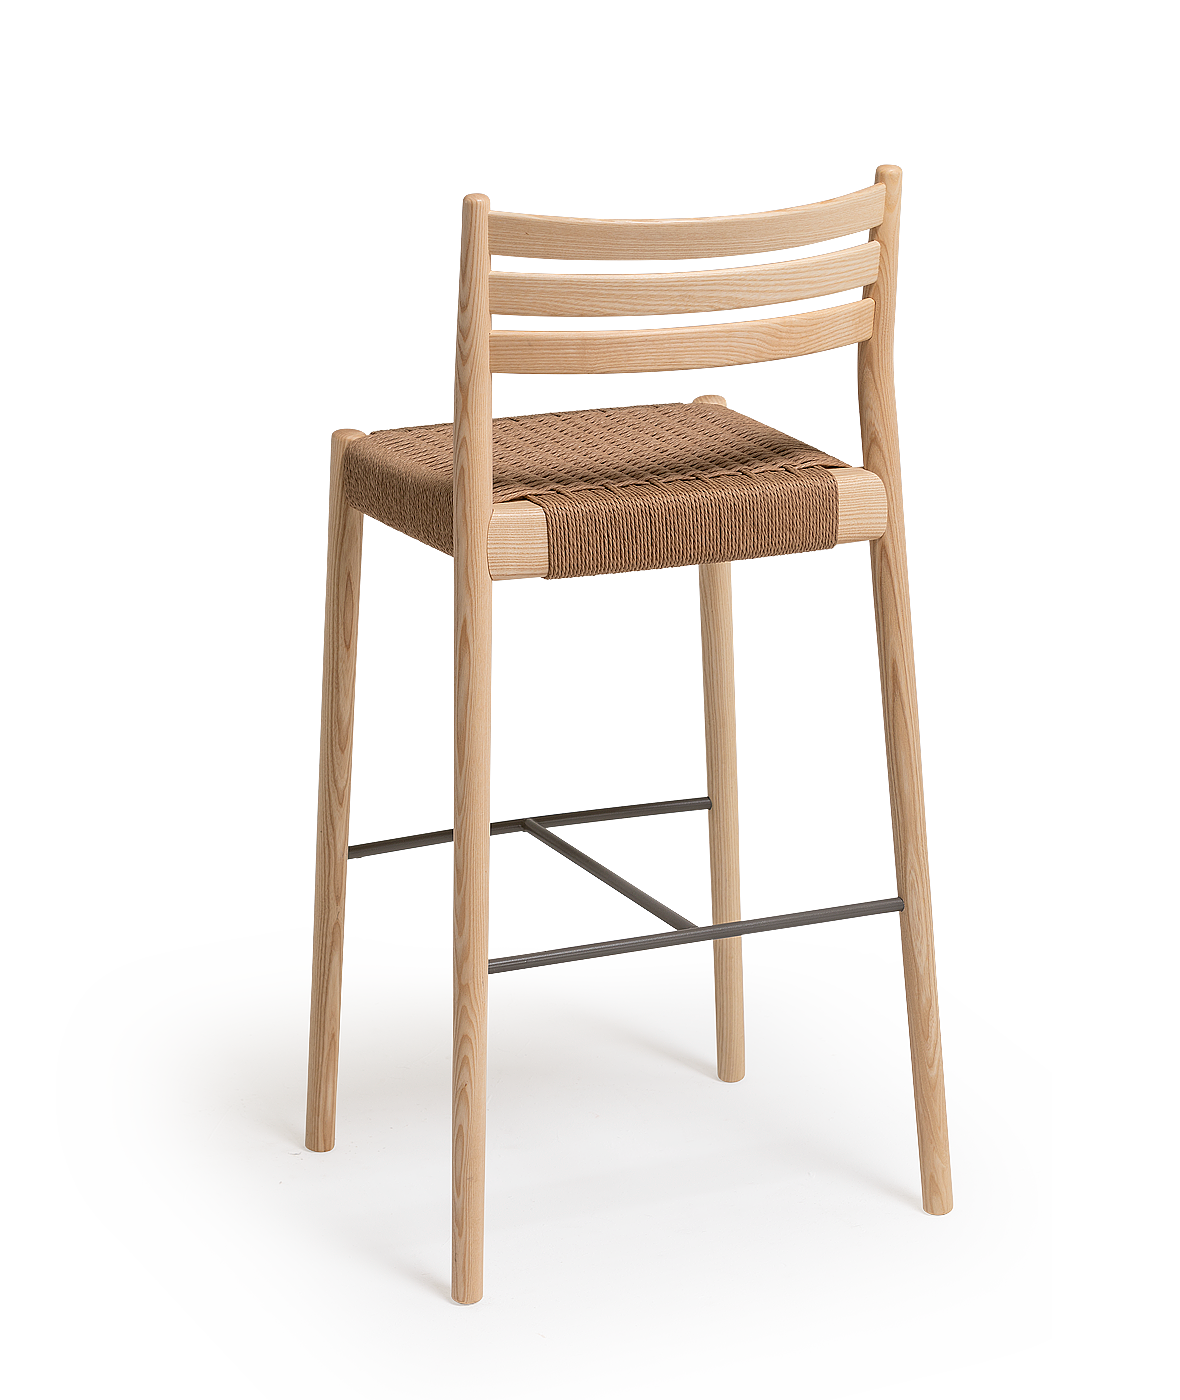 Vergés - Bogart Stool with backrest and braided rope seat